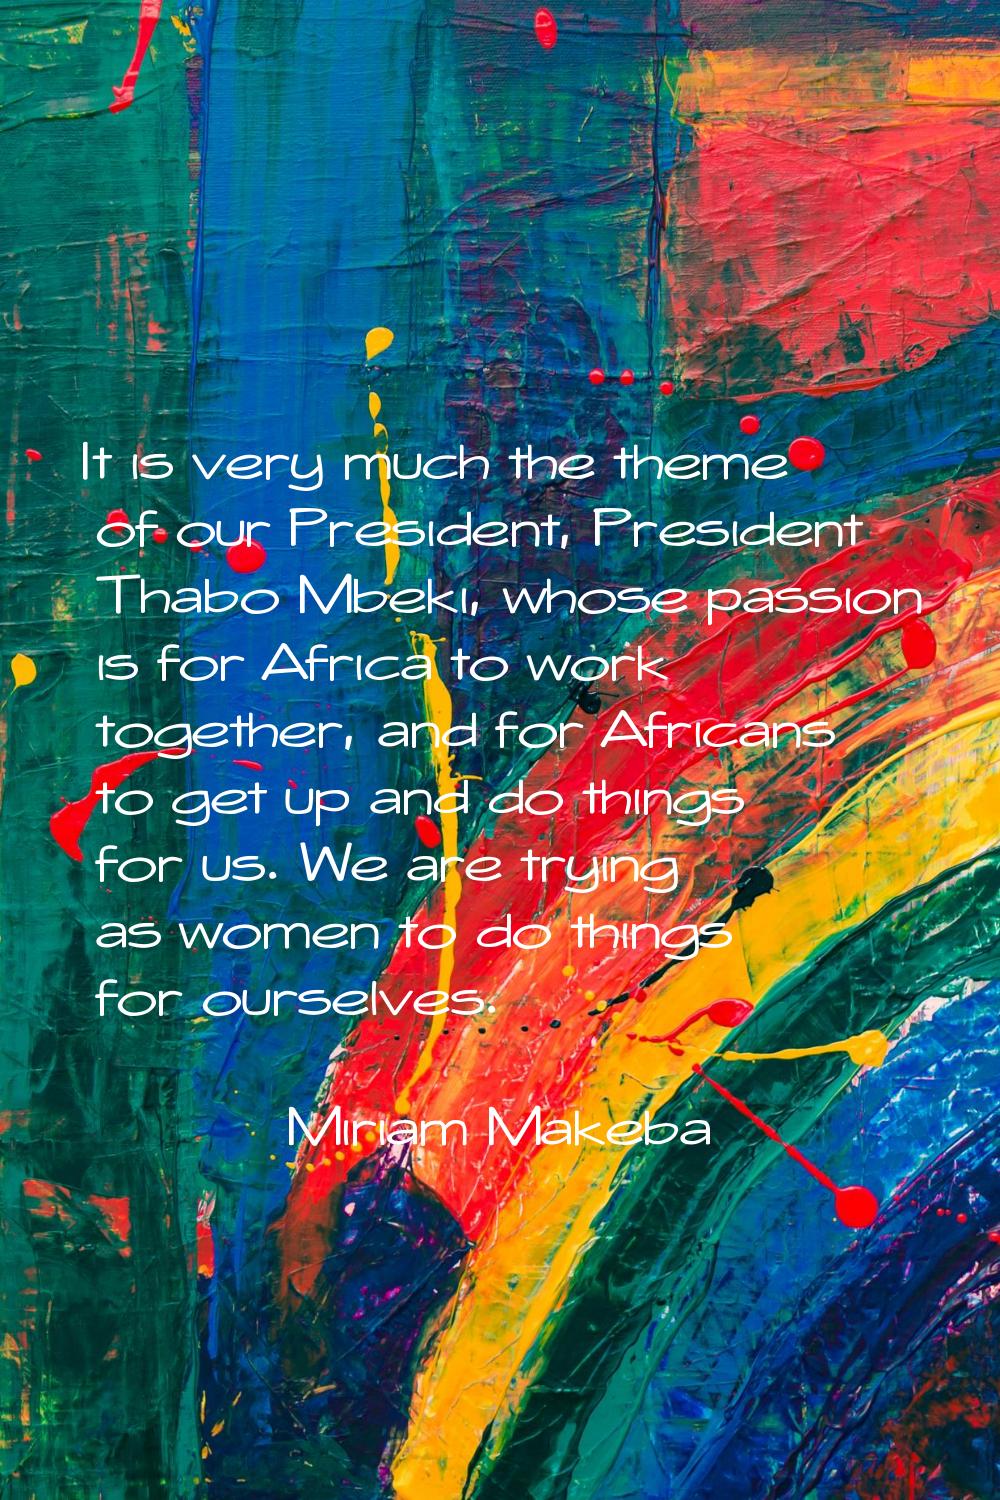 It is very much the theme of our President, President Thabo Mbeki, whose passion is for Africa to w